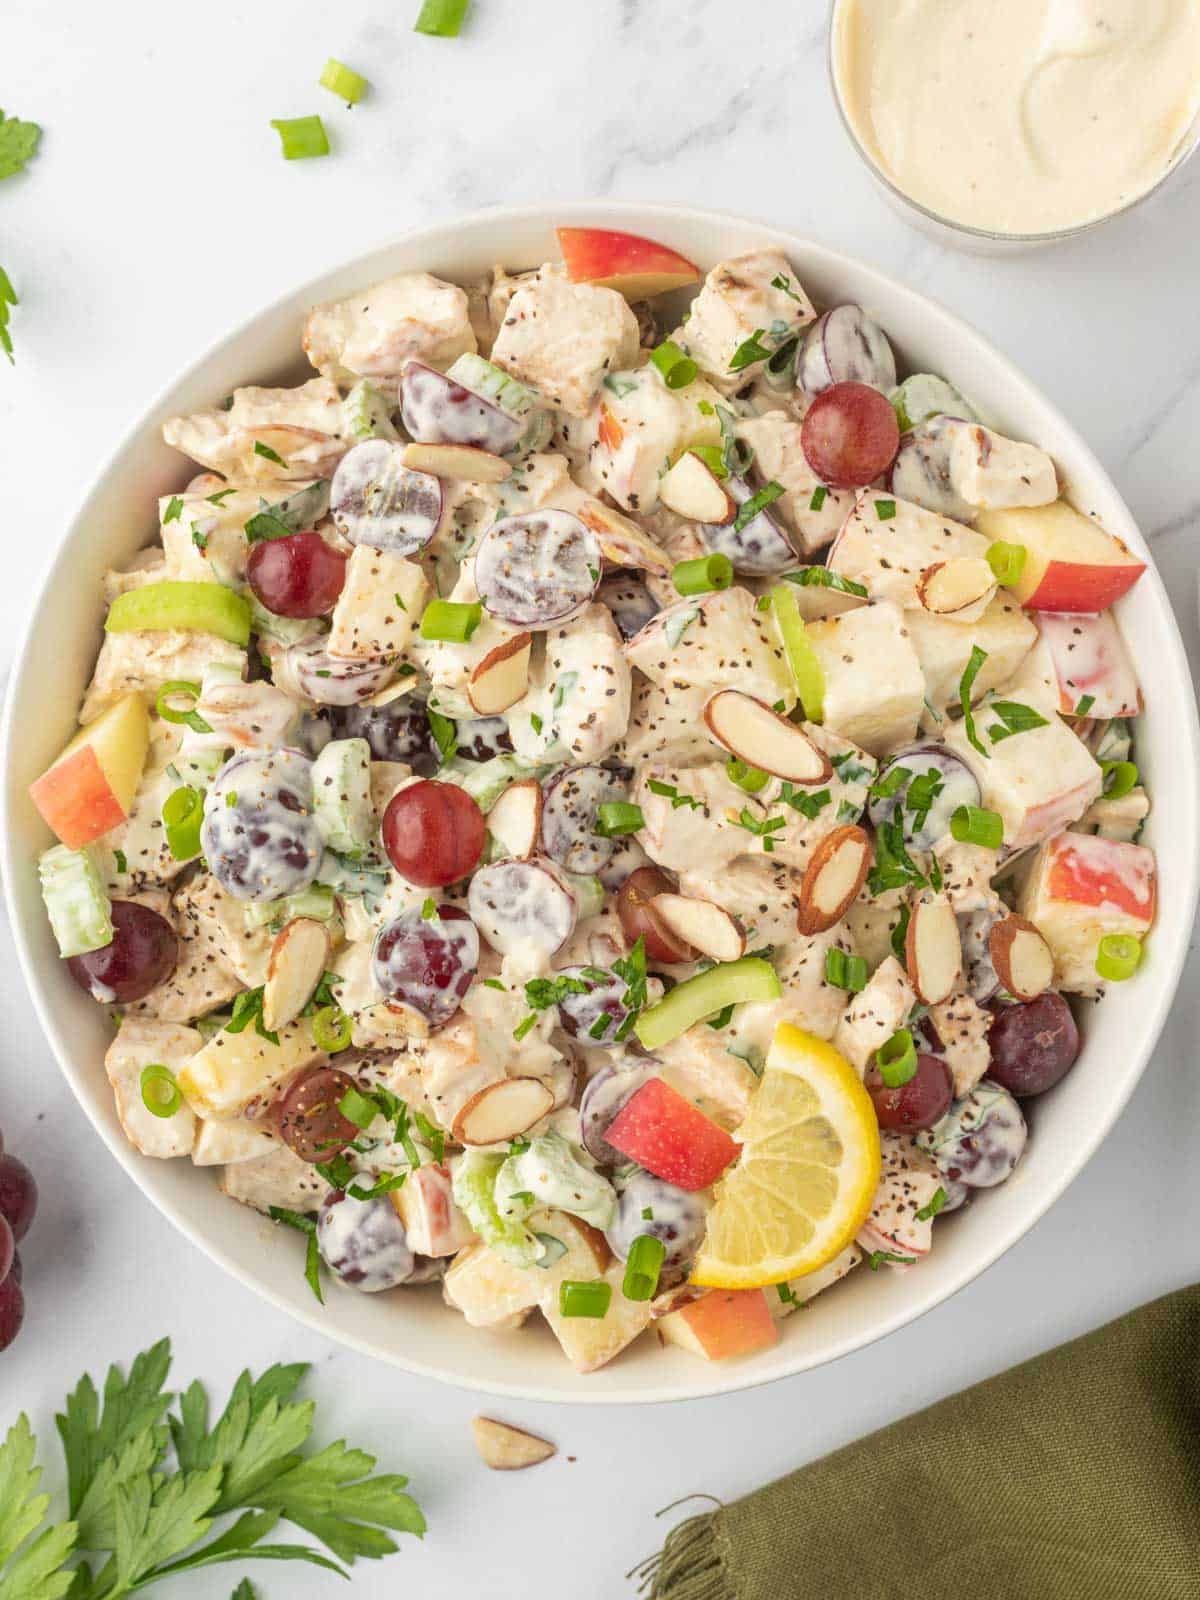 A bowl of chicken salad with grapes and apples.